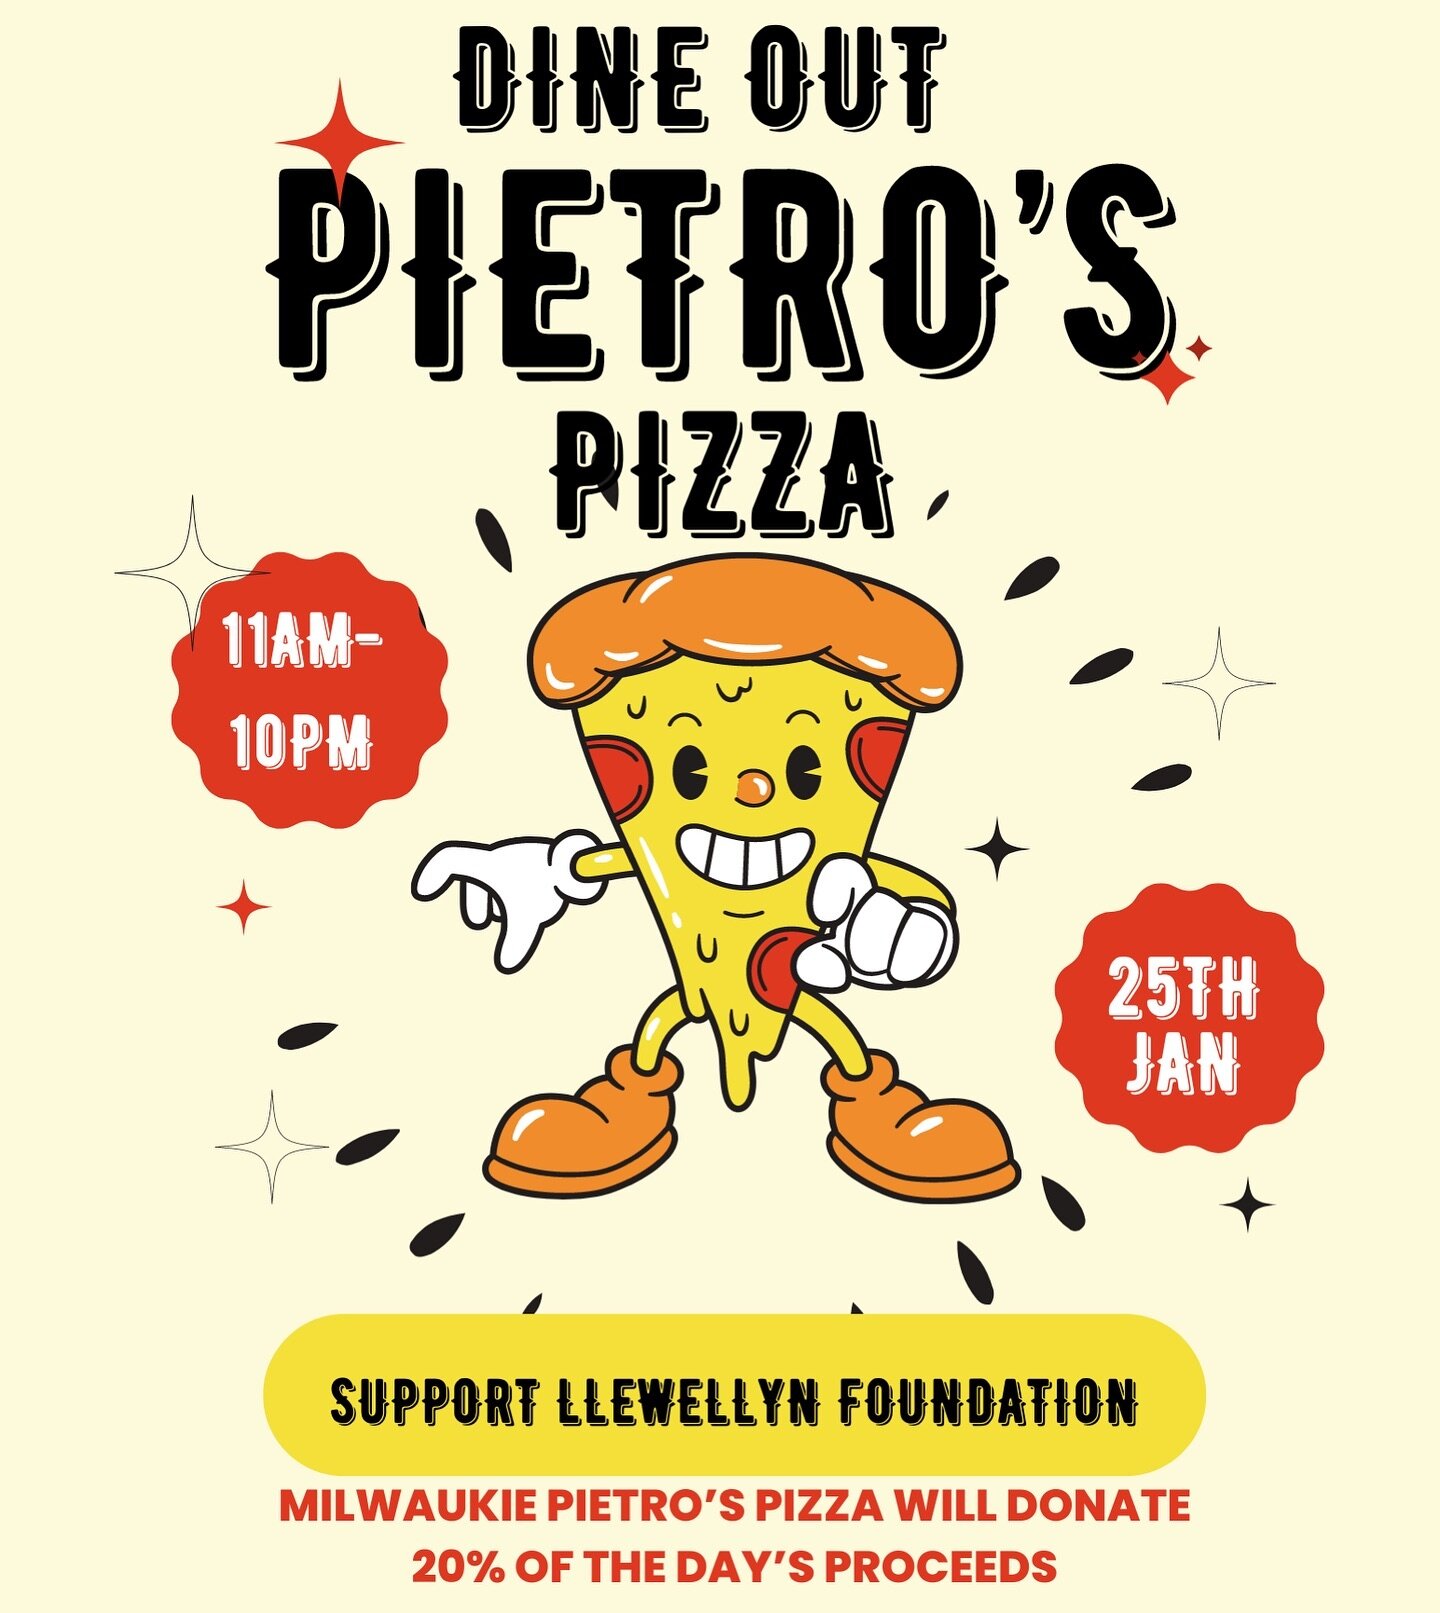 Gather your classmates and party at Pietro&rsquo;s Pizza this Thursday, January 25th. Don&rsquo;t forget to leave time for arcade games! Pietro&rsquo;s will be donating 20% of the days sales to your Llewellyn Foundation to help provide additional edu